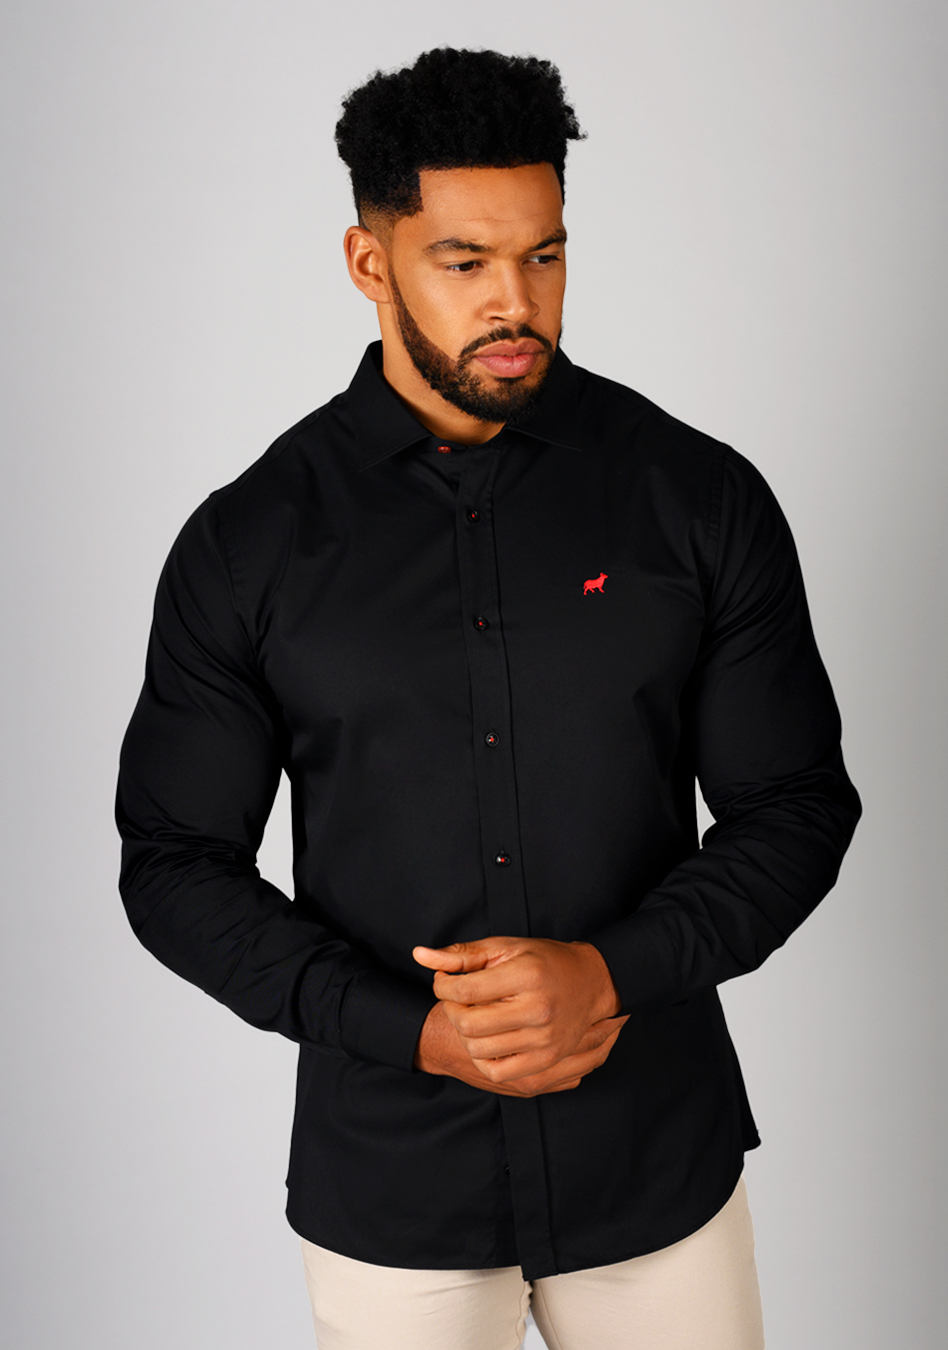 Black Stretch muscle fit on an athletically built model, showcasing the athletic fit design that enhances physique, with stretch fabric for comfort and mobility